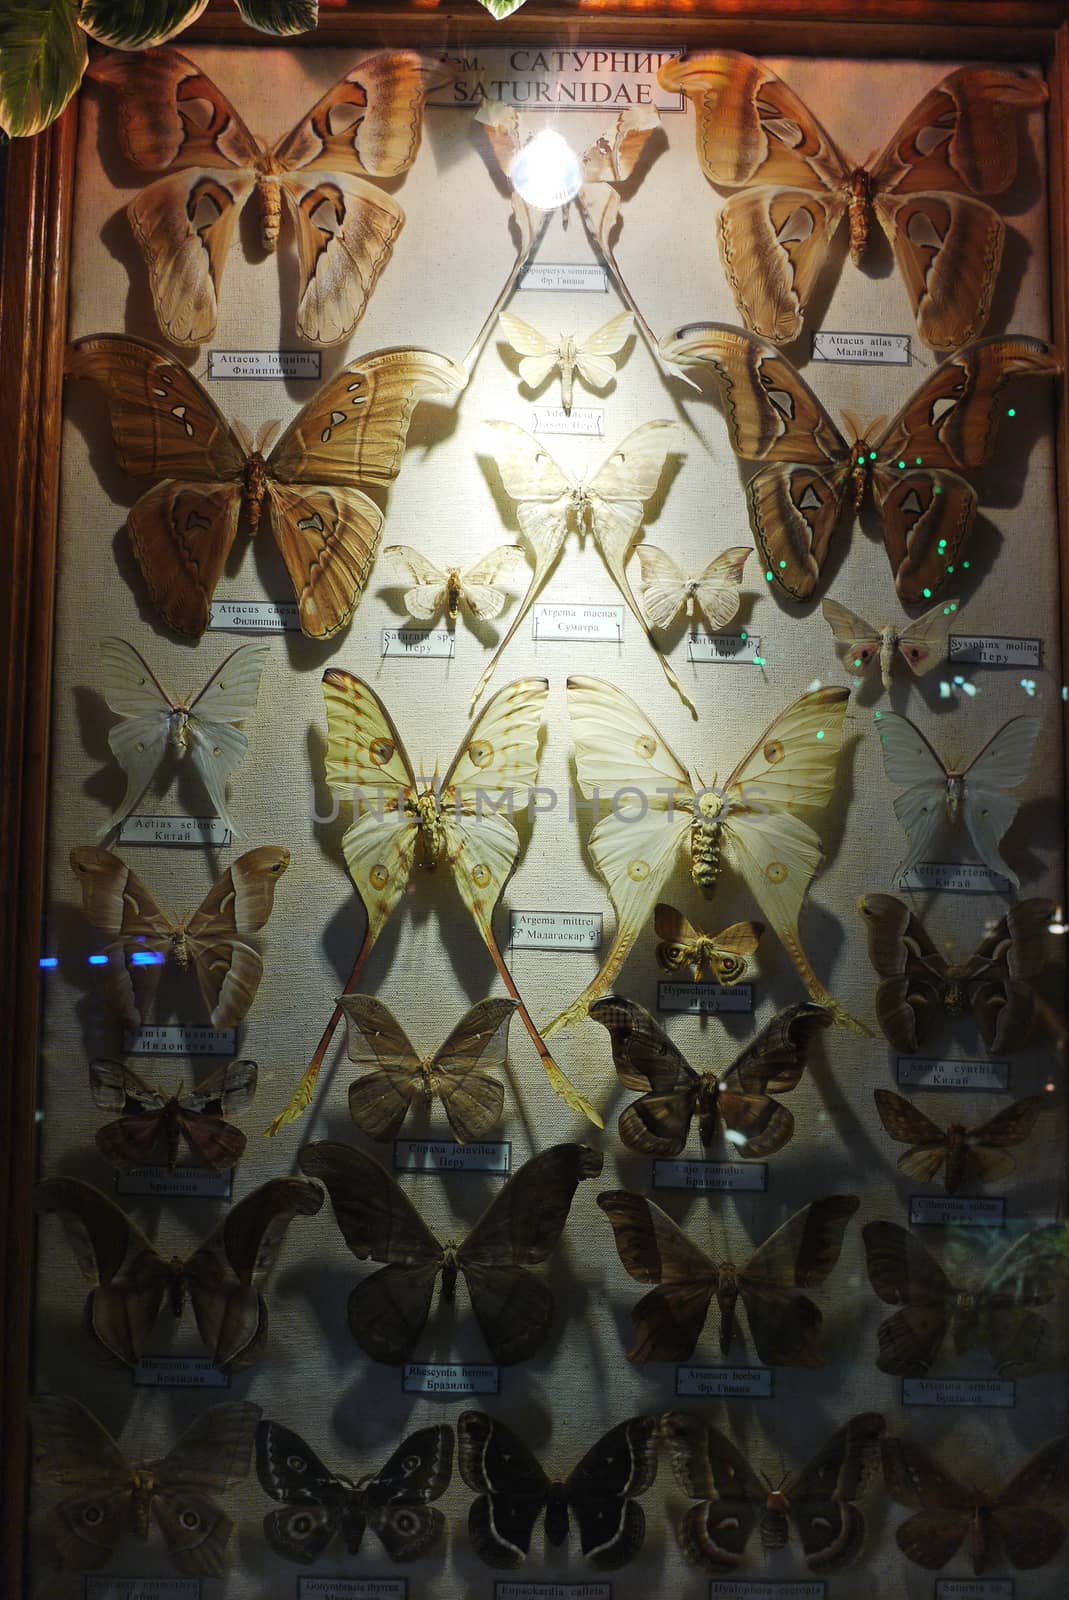 exhibition picture of herbarium dry butterflies of various kinds by Adamchuk